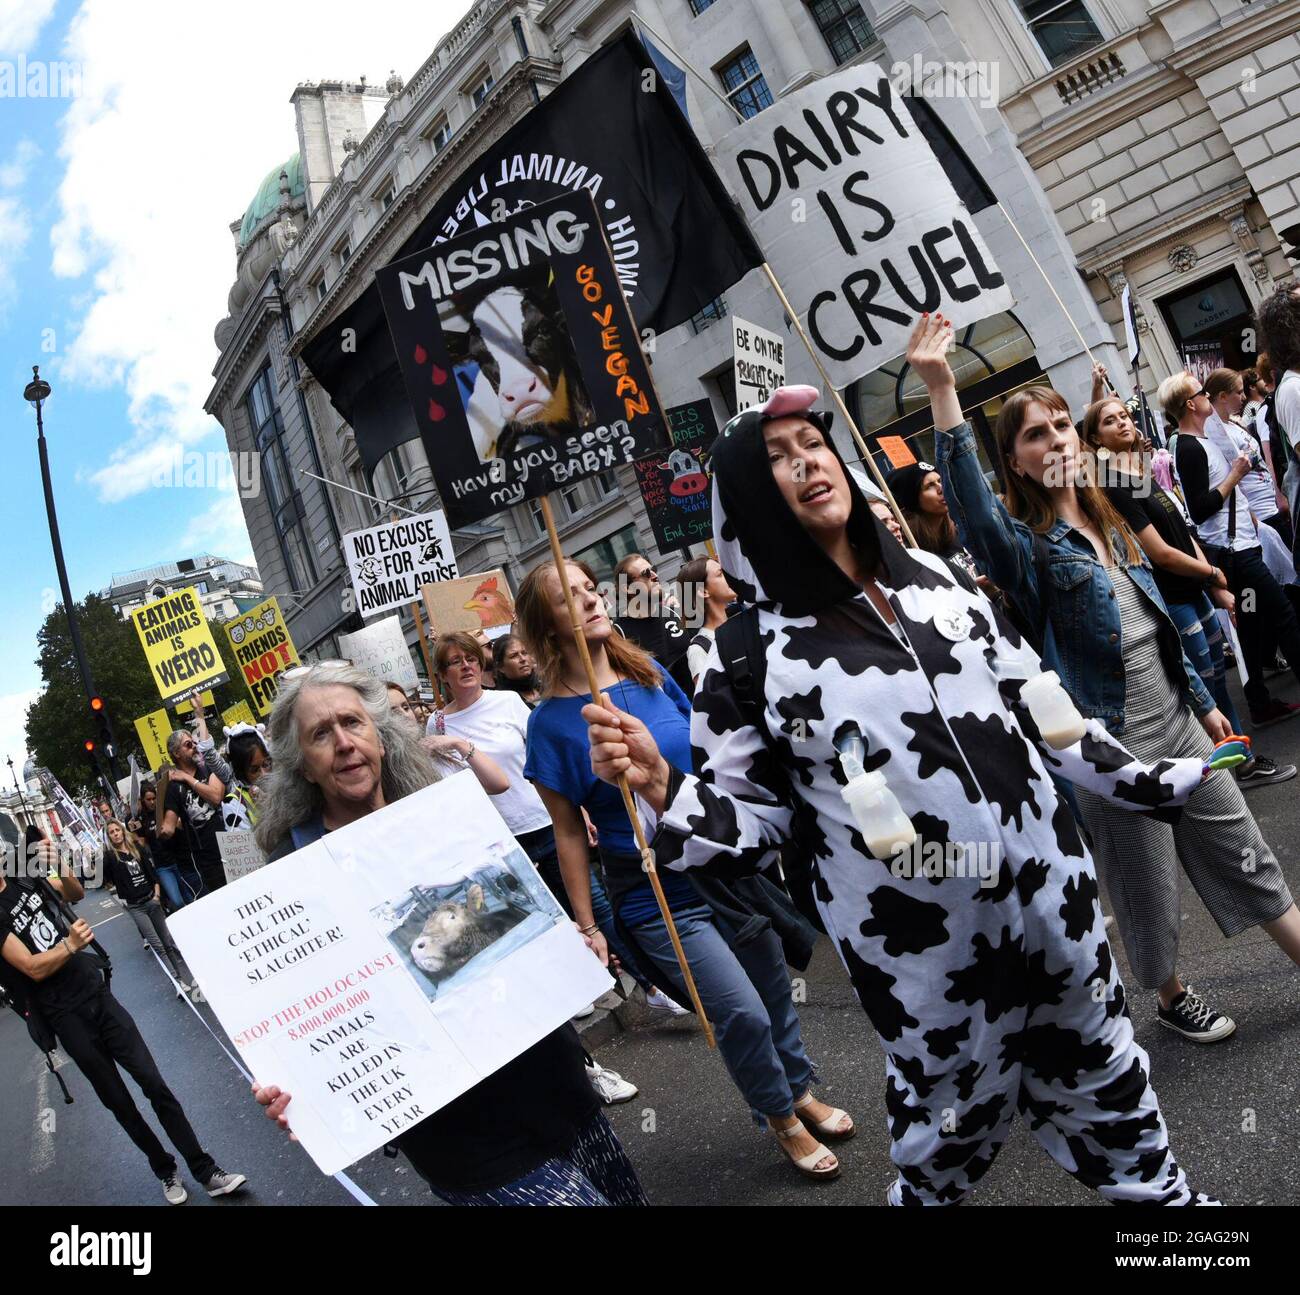 The Official Animal Rights March, London, 2018. Vegan Activists marching through UK’s capital city on 25th August 2018, protesting against animal cruelty. Stock Photo